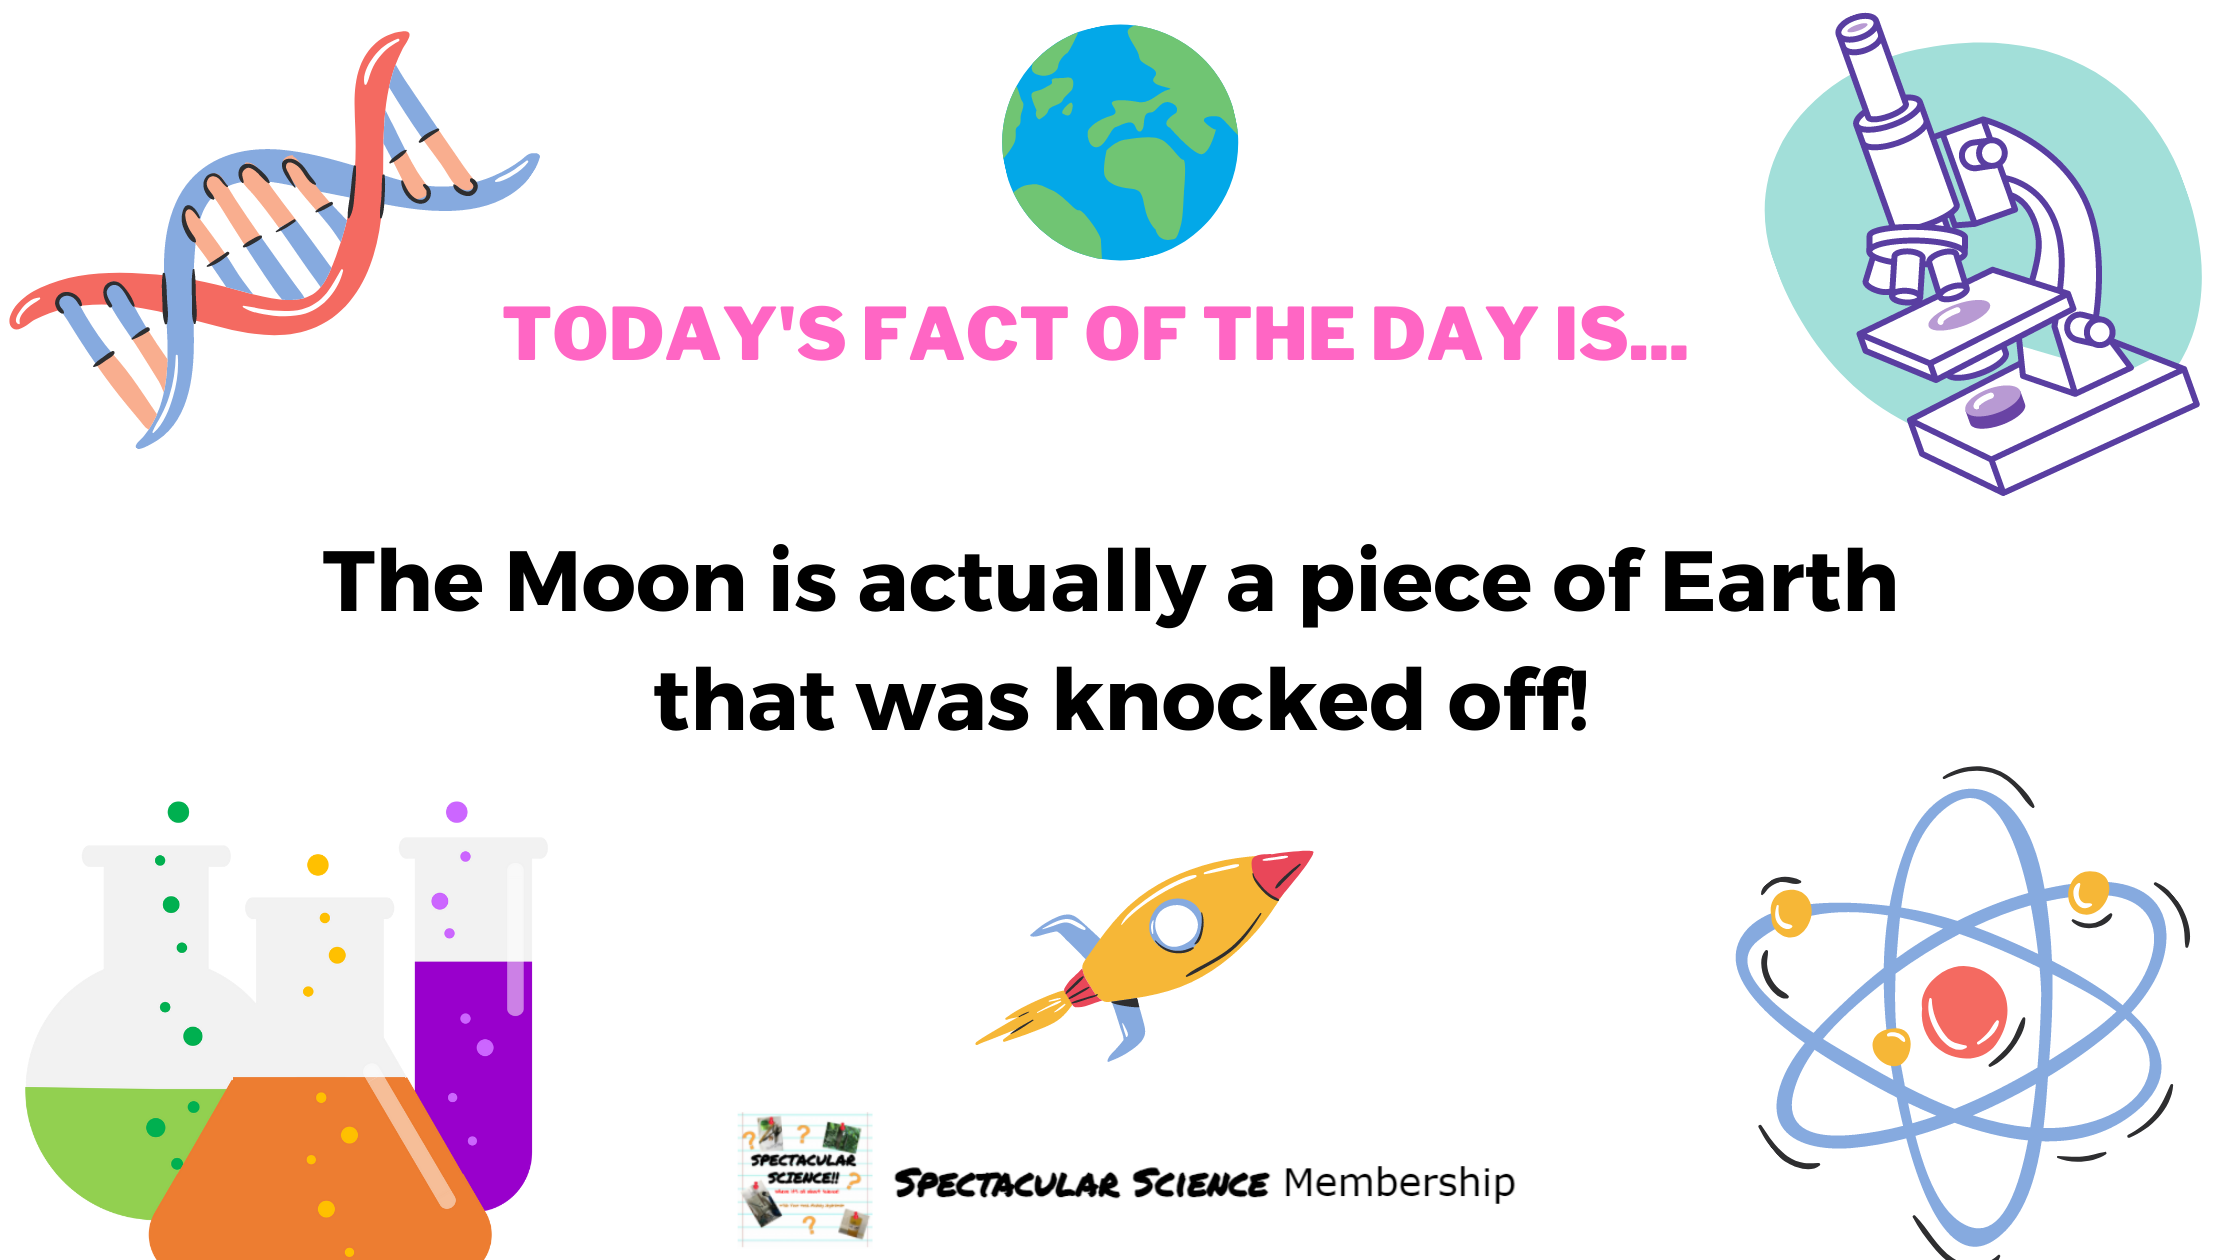 Fact of the Day Image Nov. 26th